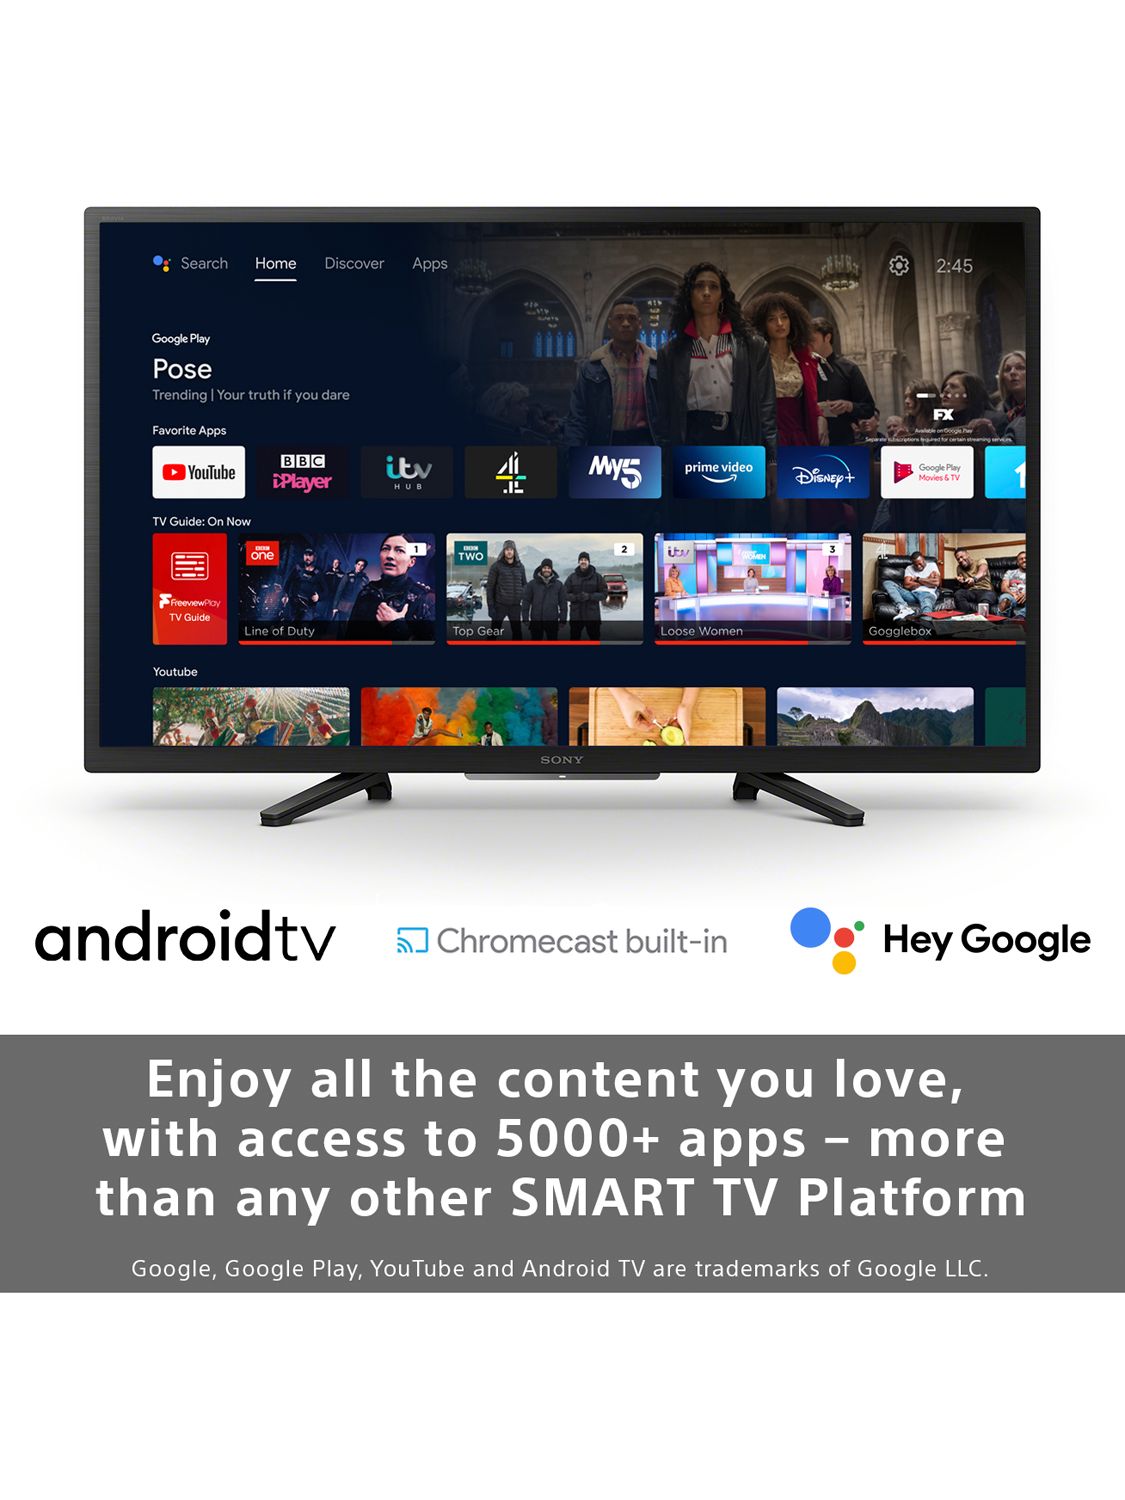 W800 Smart TV, Enjoy Entertainment with Android TV